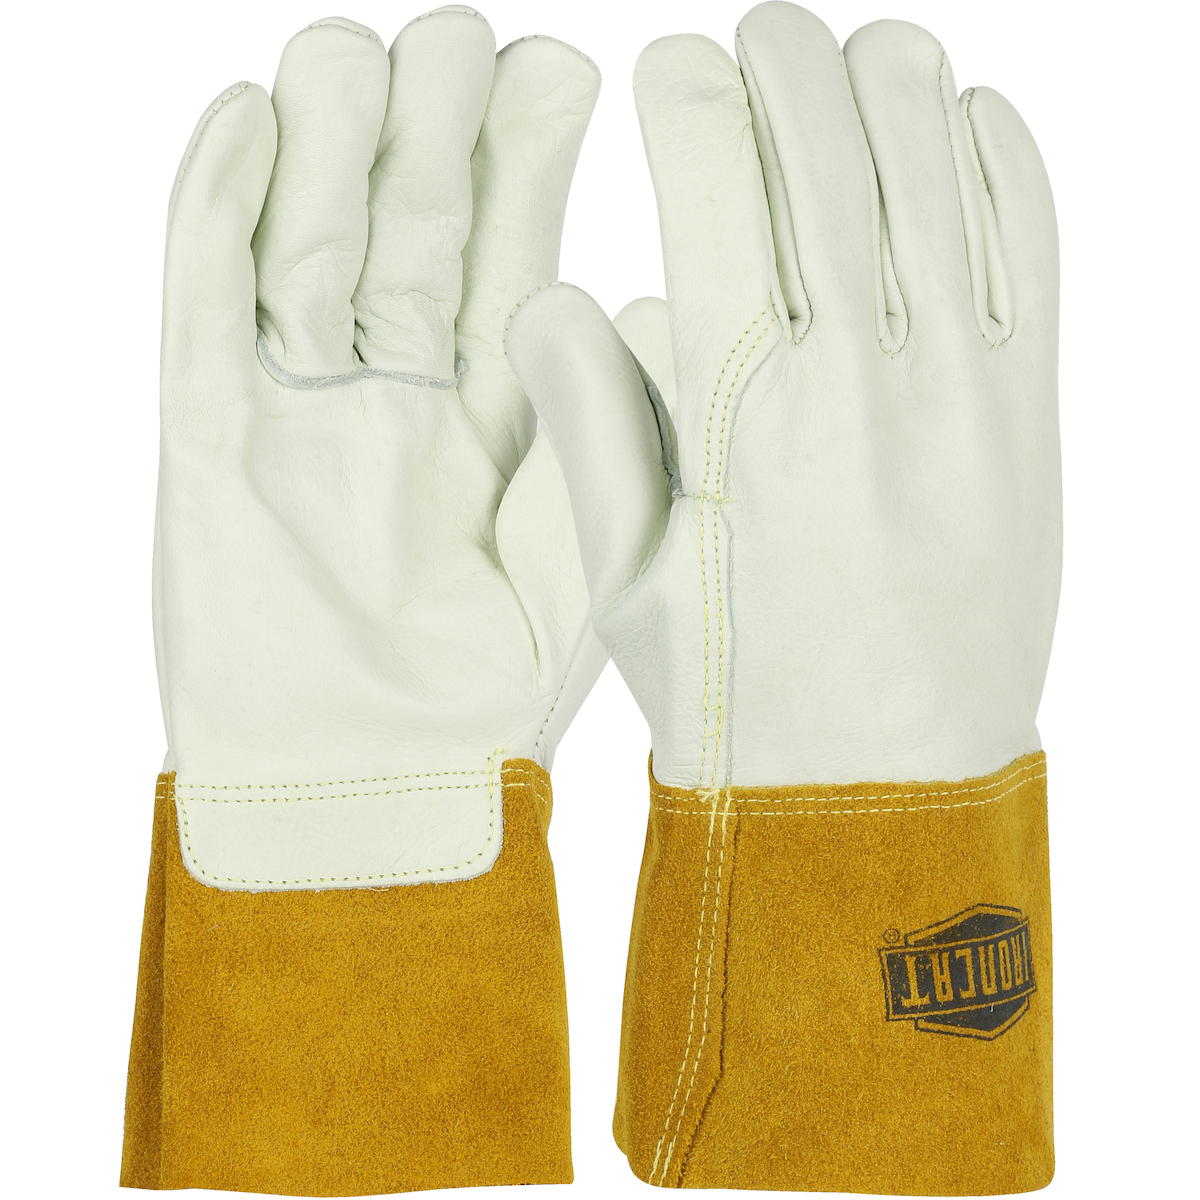 6010 PIP® Ironcat Premium Top Grain Cowhide Leather Mig Tig Welder's Glove with Kevlar Stitching and 4-inch Leather Gauntlet Cuff